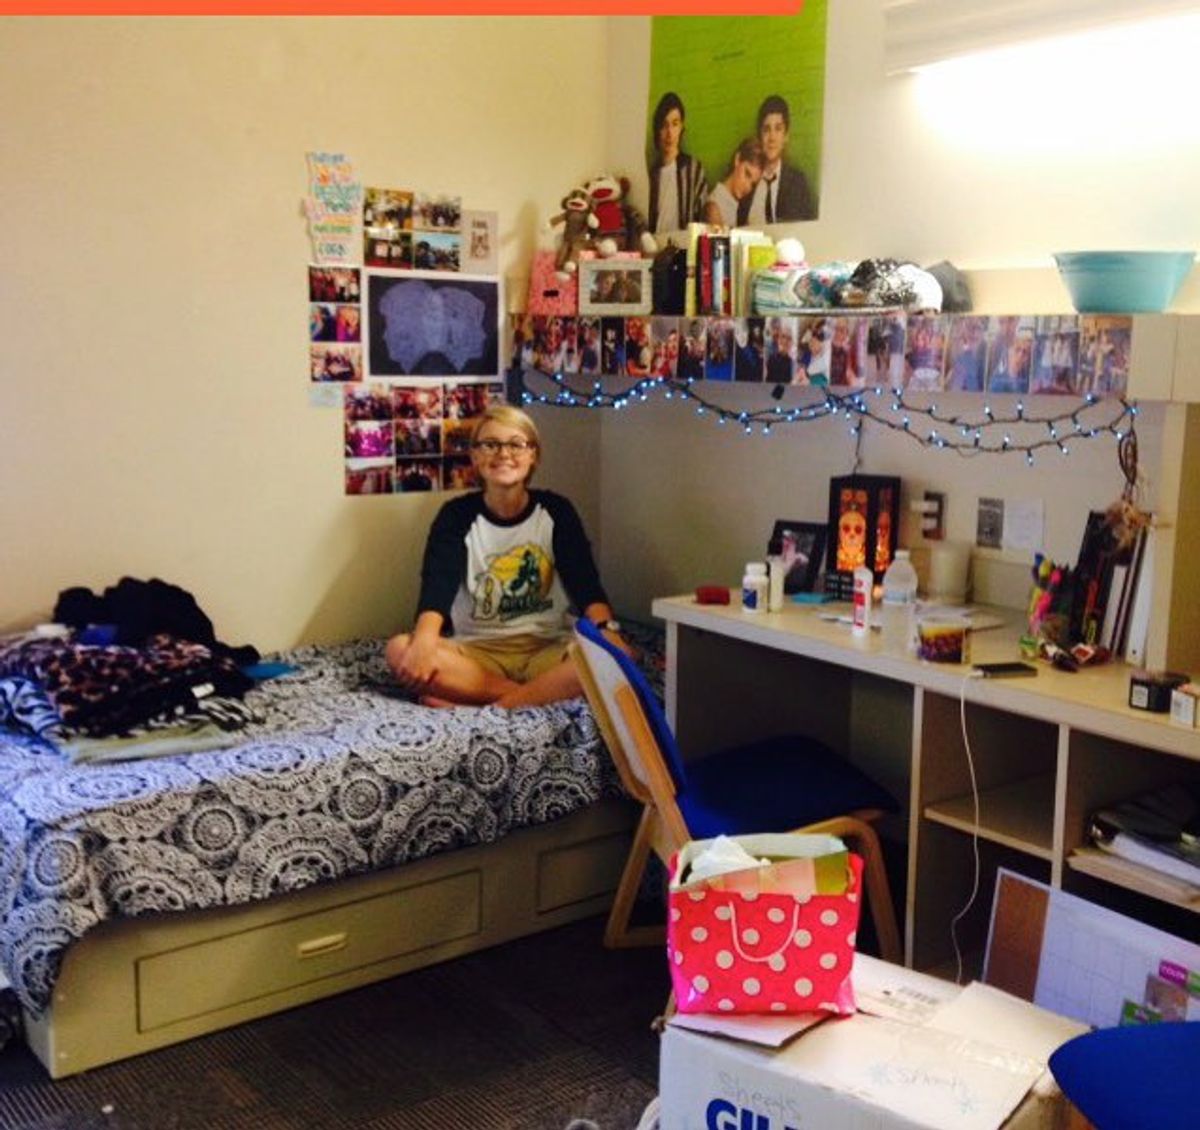 8 Things To Make Your Dorm The Best